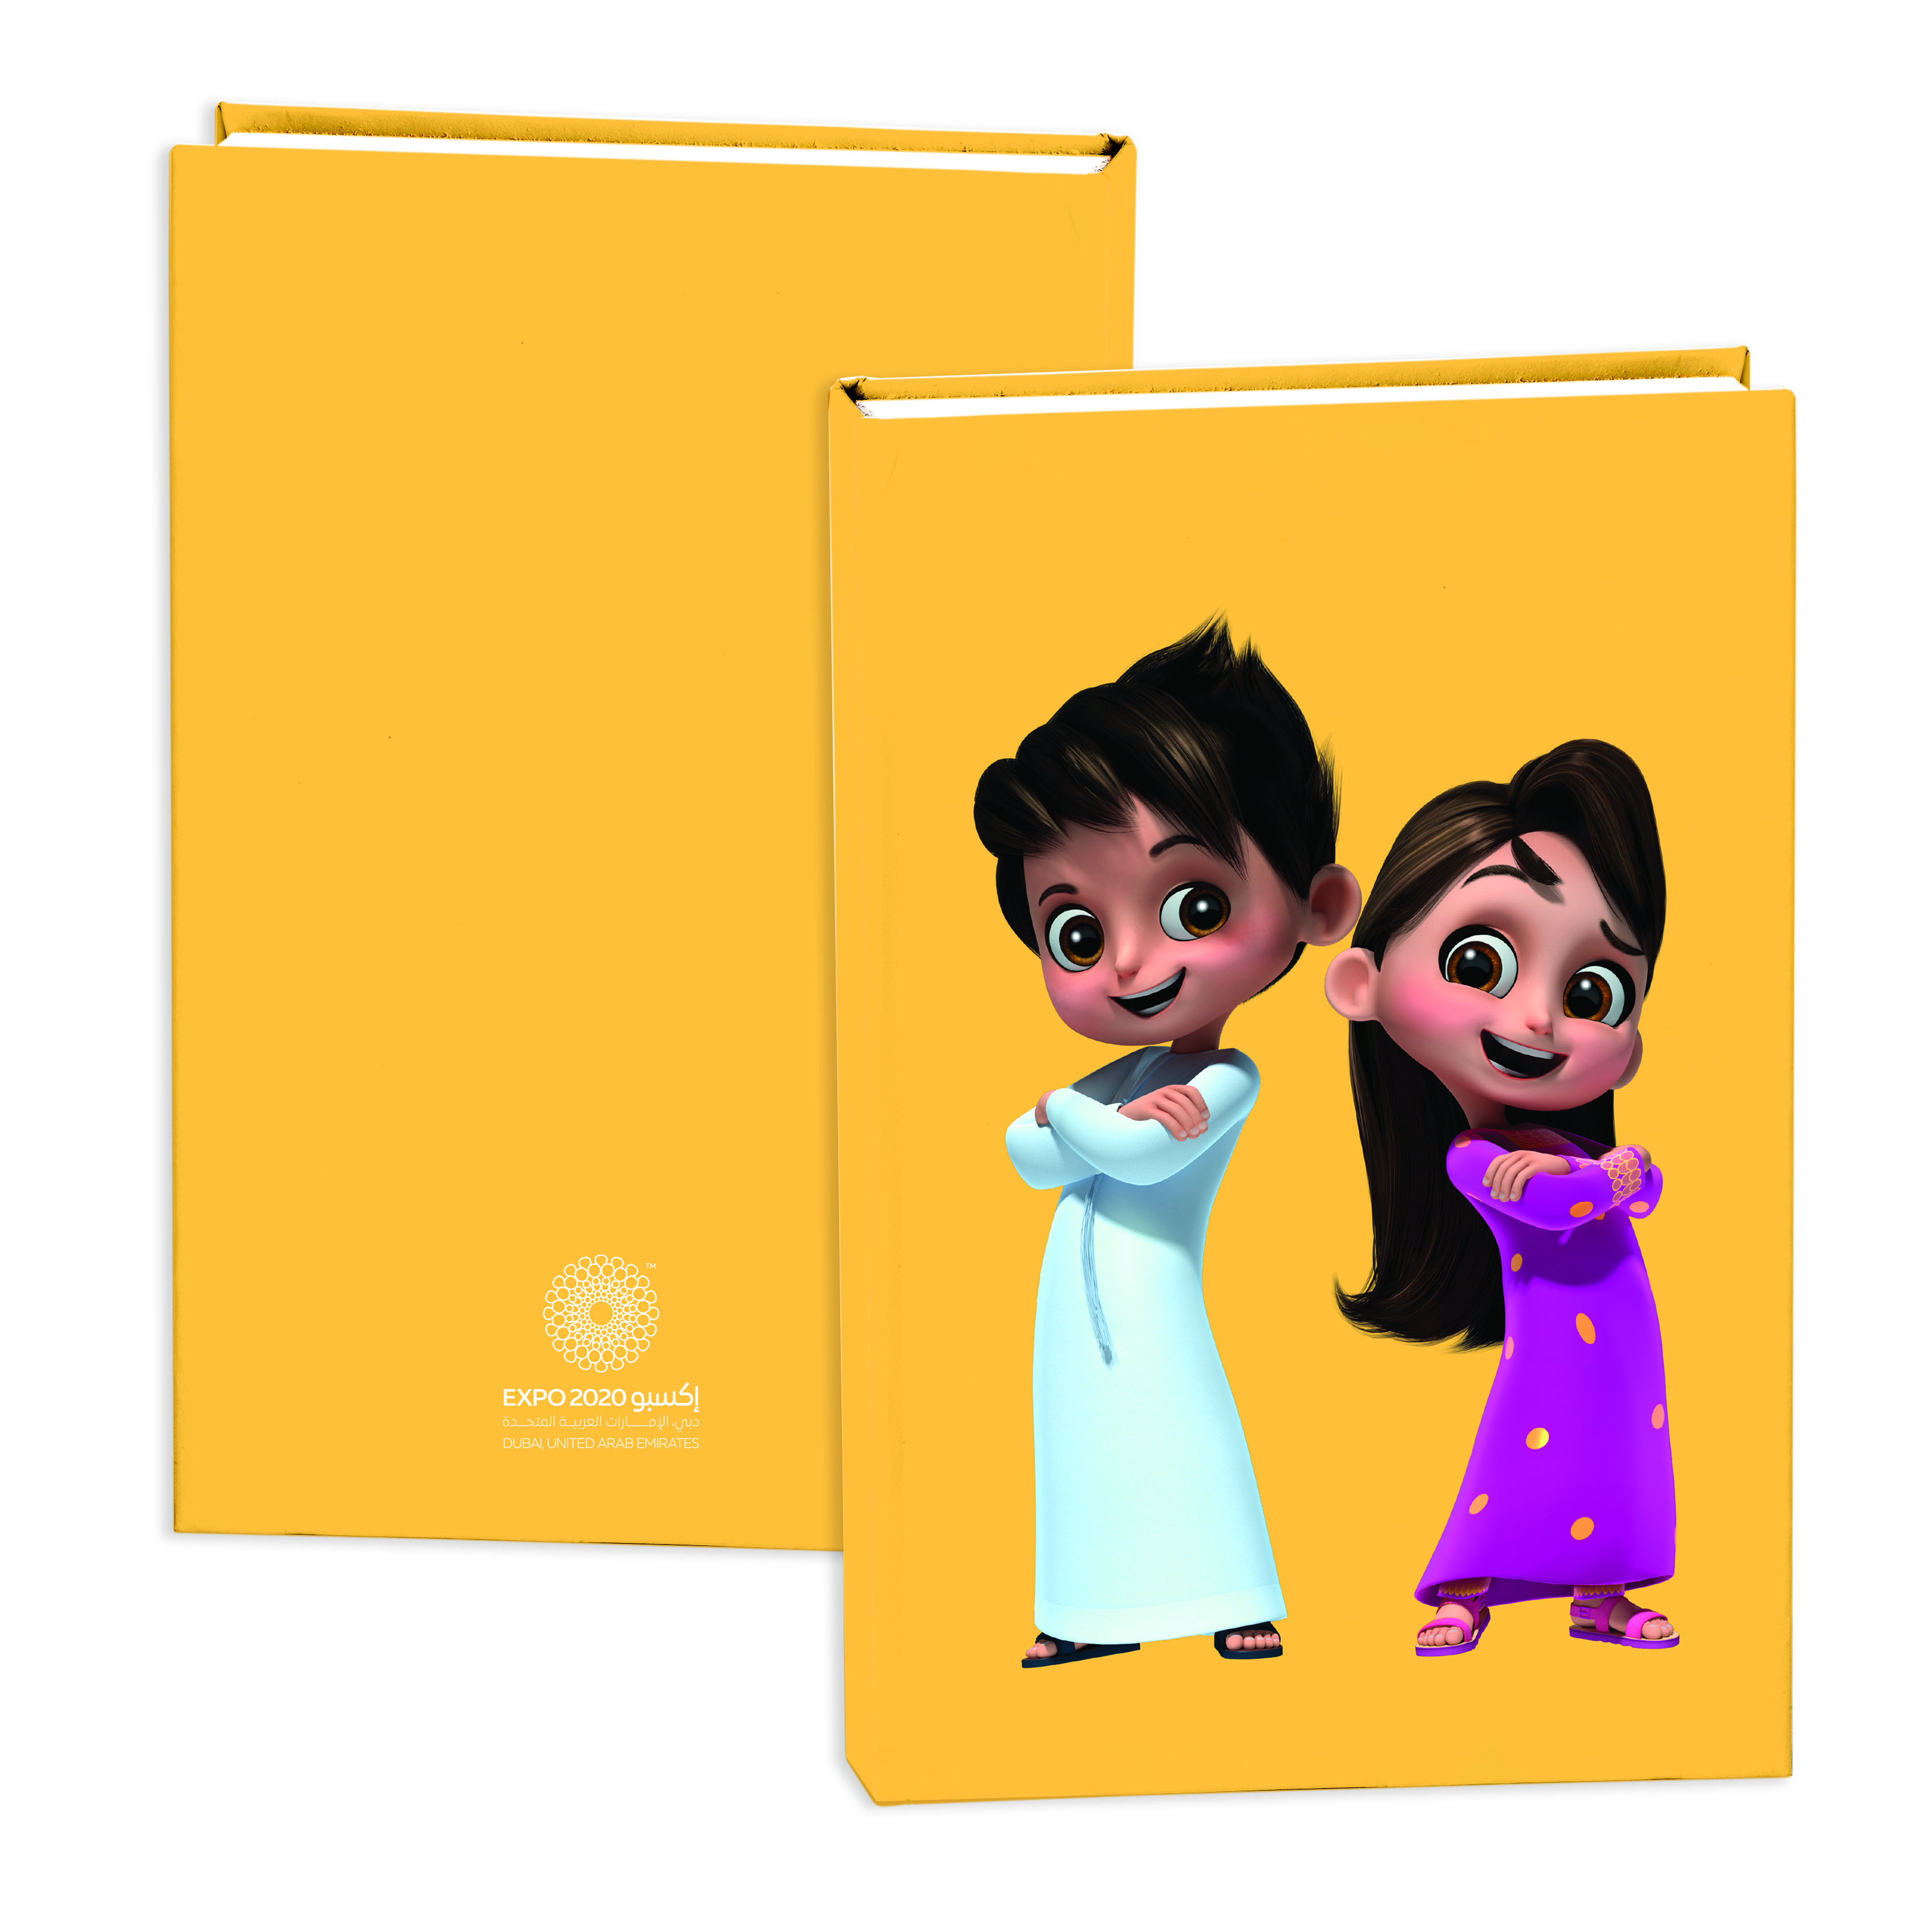 Expo 2020 Dubai Mascots A5 Hardcase Exercise Books Pack of 2 - 192 Pages